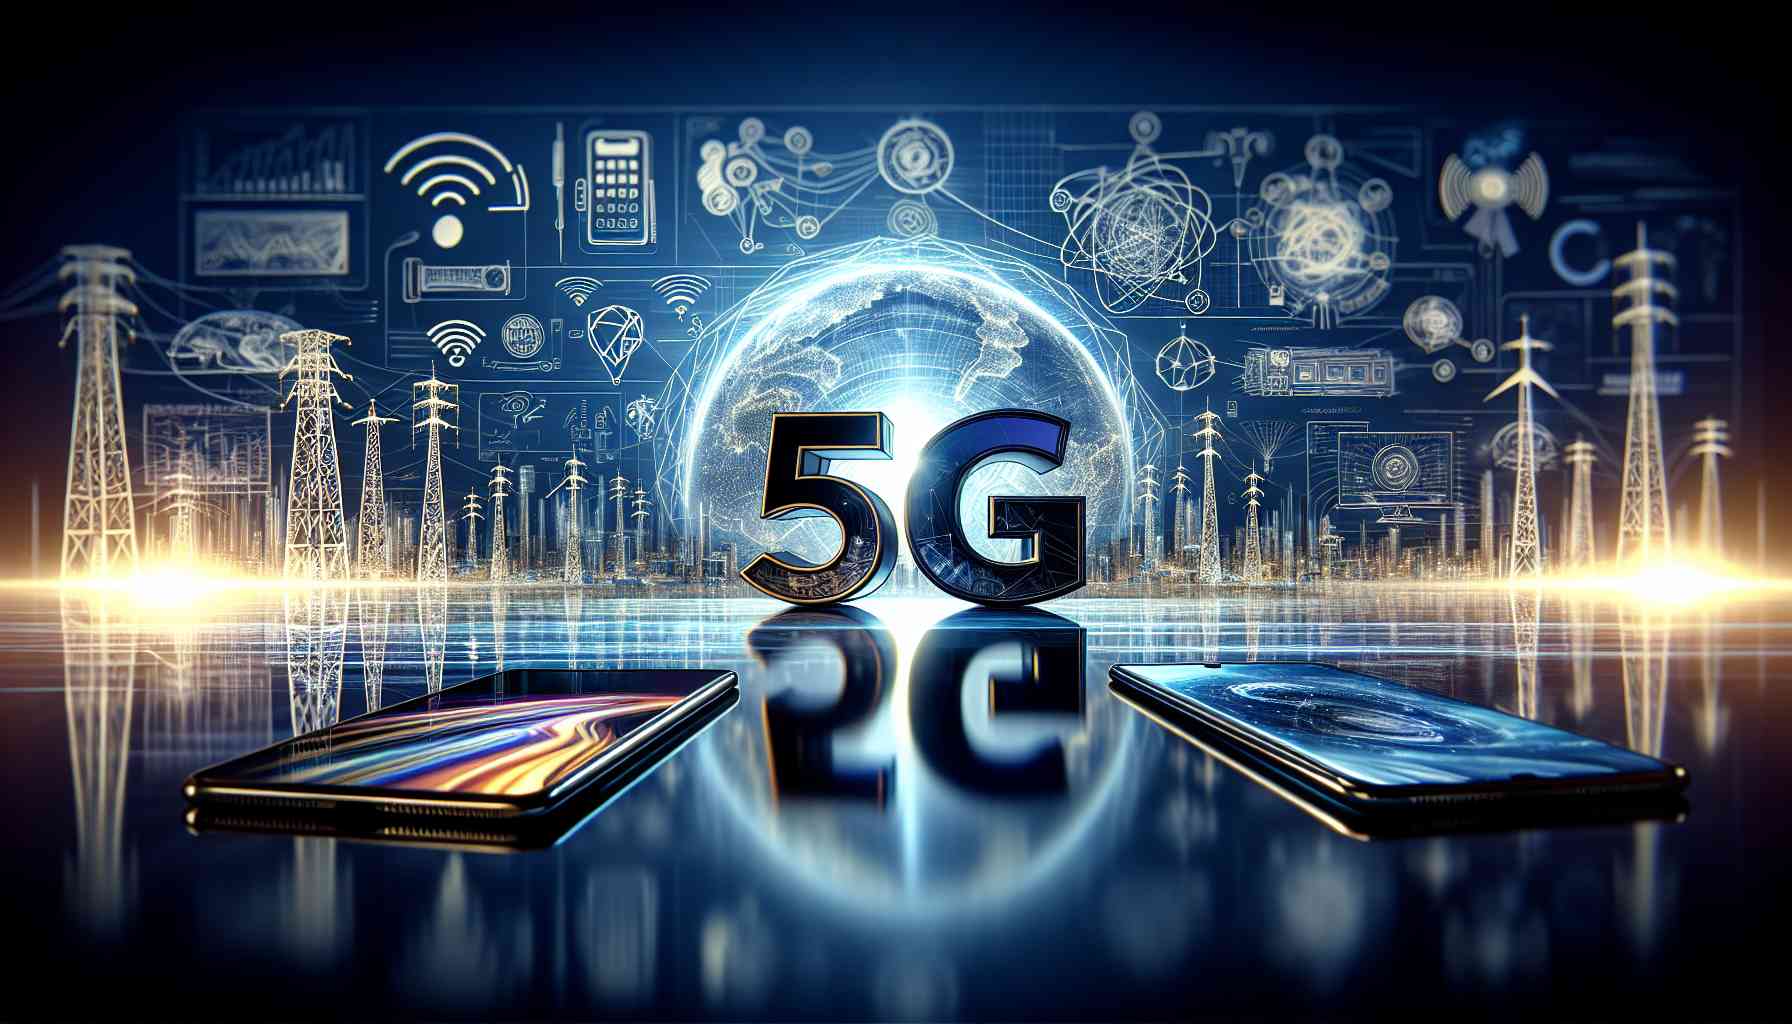 Nokia and Honor Seal Major 5G Patent Cross-License Agreement